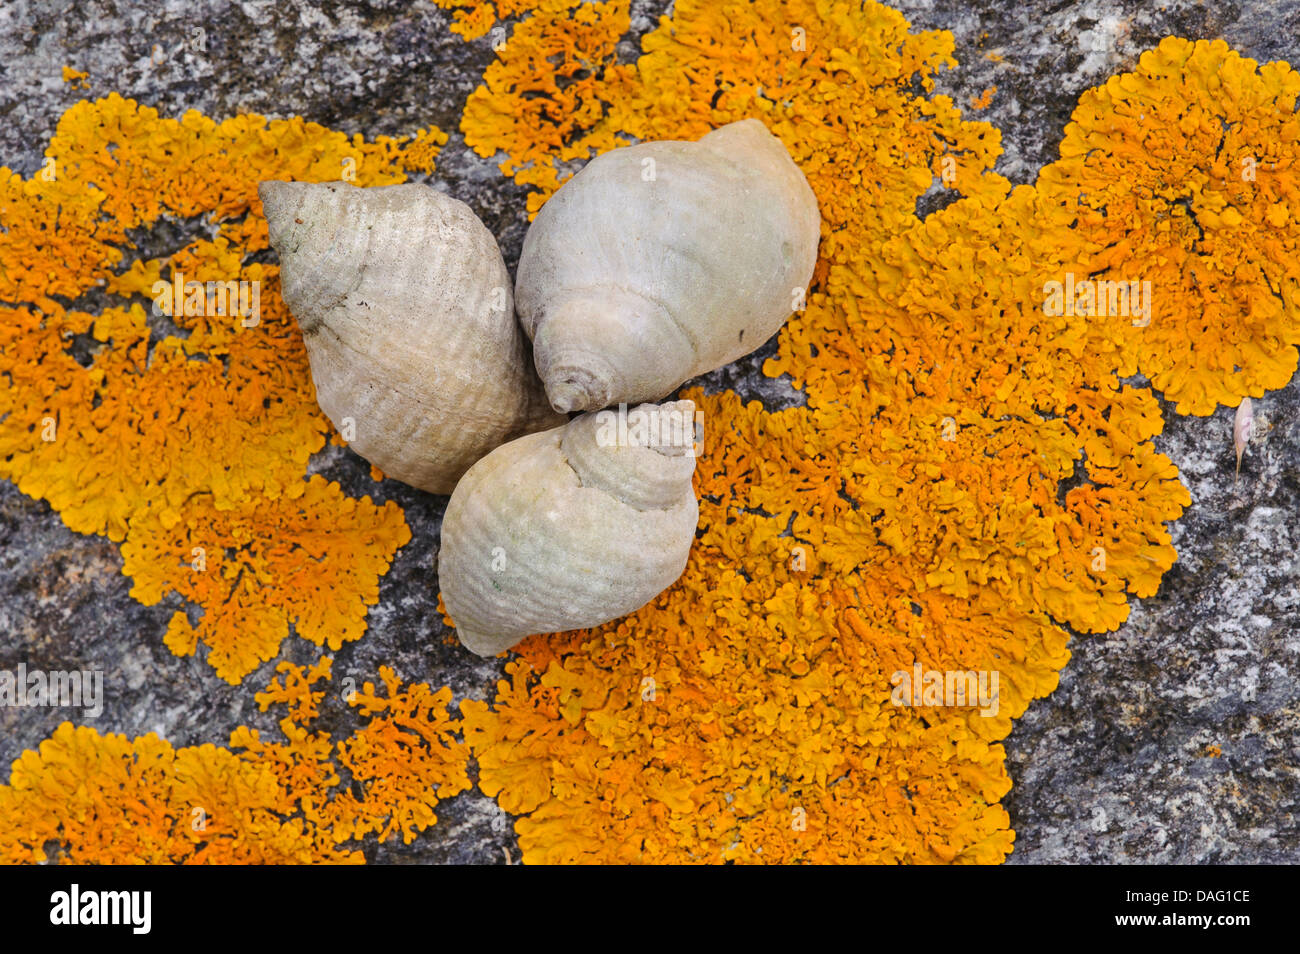 whelks (Buccinidae), three snails on a lichened coast rock, Norway Stock Photo